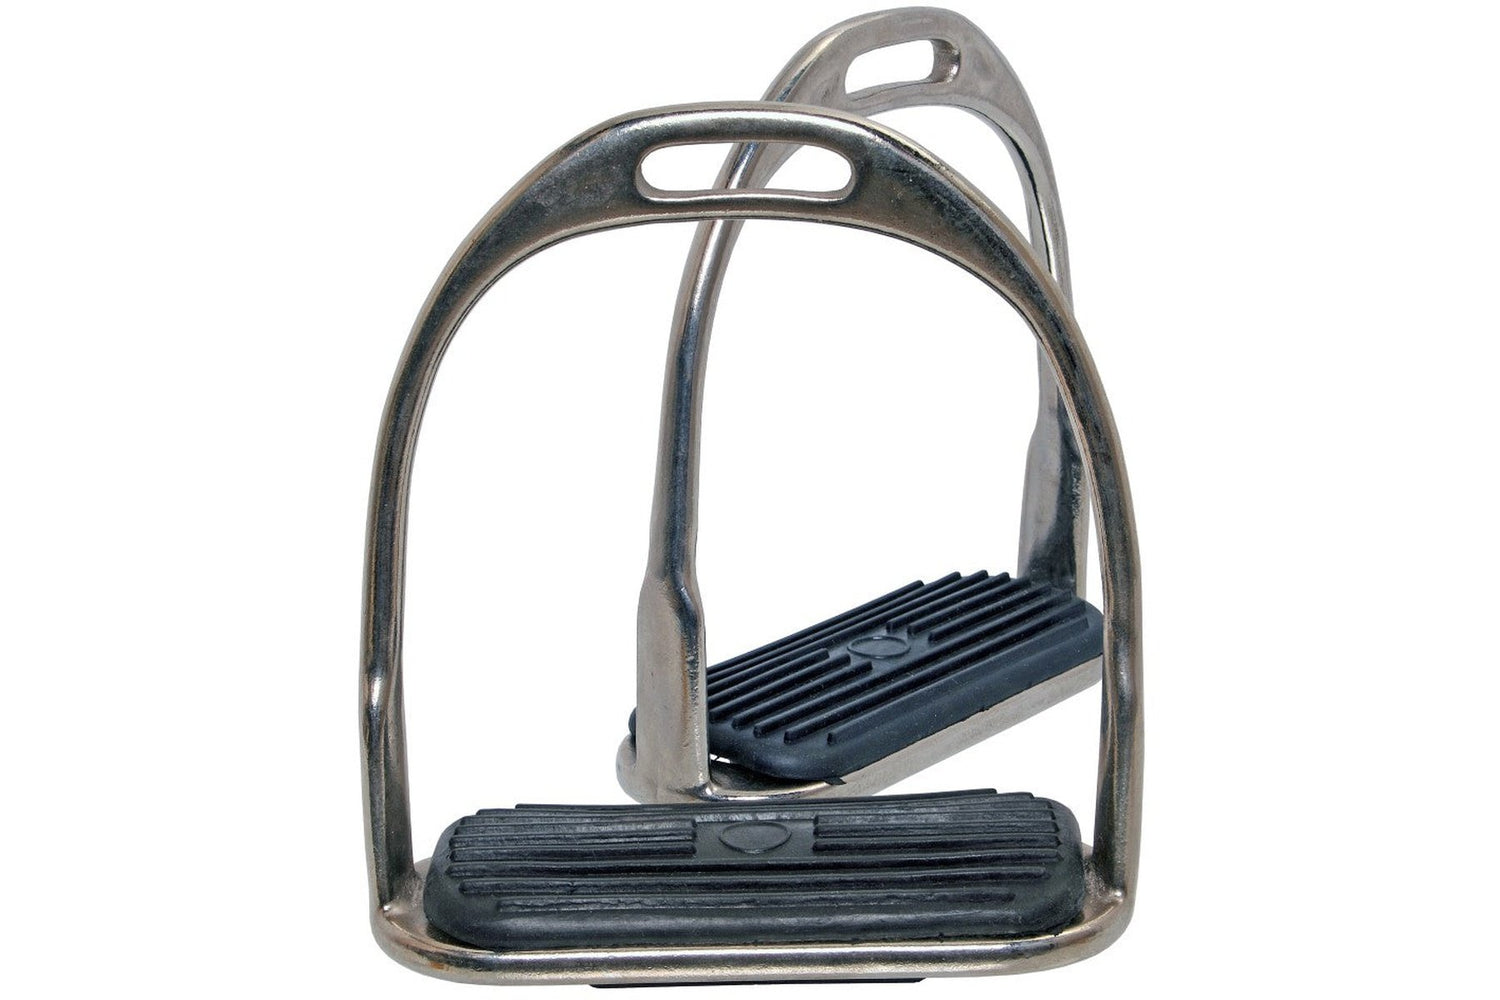 Blue Tag NP Stirrup Irons fitted with Rubber Treads